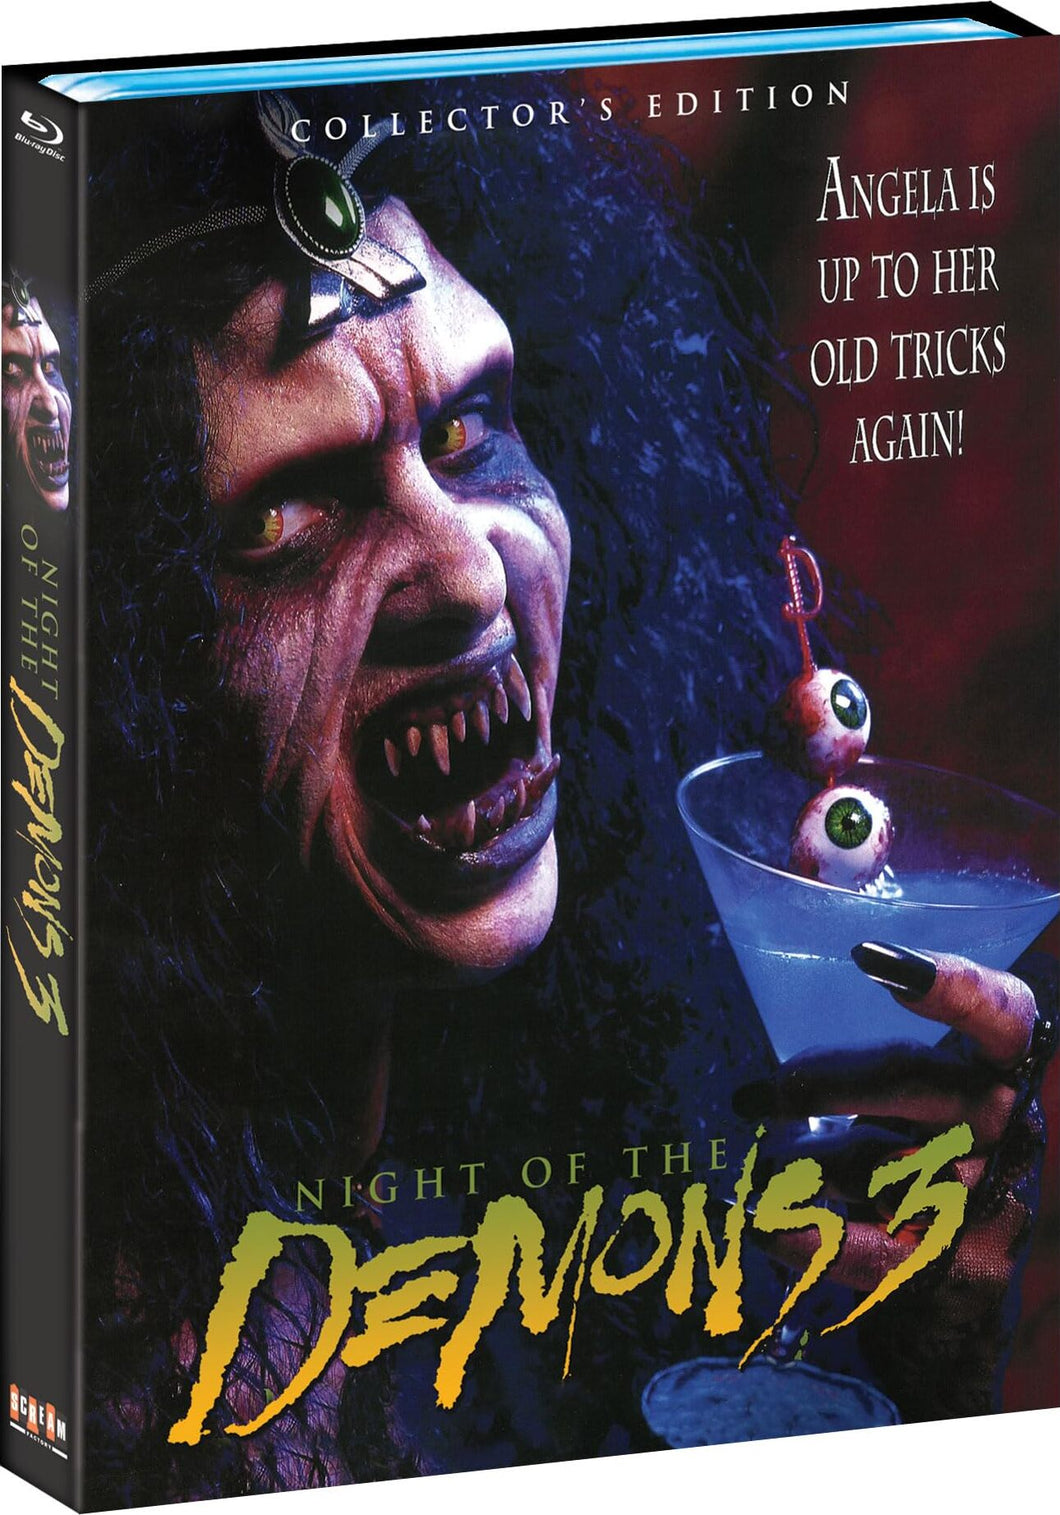 Night of the Demons 3 (1997) - front cover